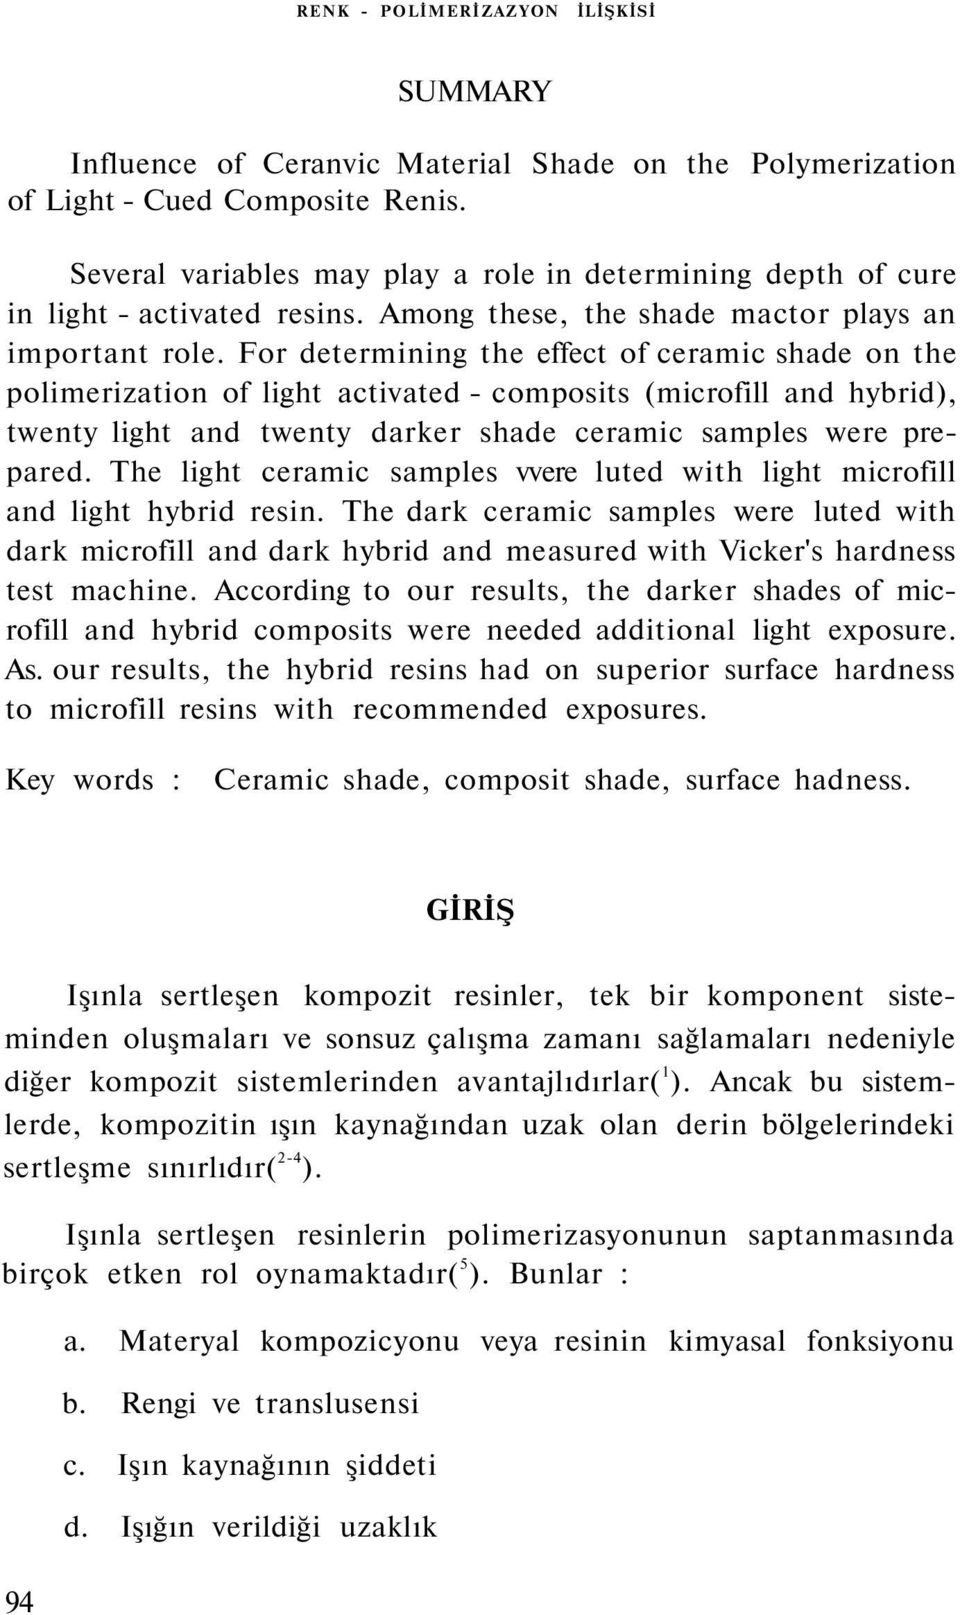 For determining the effect of ceramic shade on the polimerization of light activated - composits (microfill and hybrid), twenty light and twenty darker shade ceramic samples were prepared.